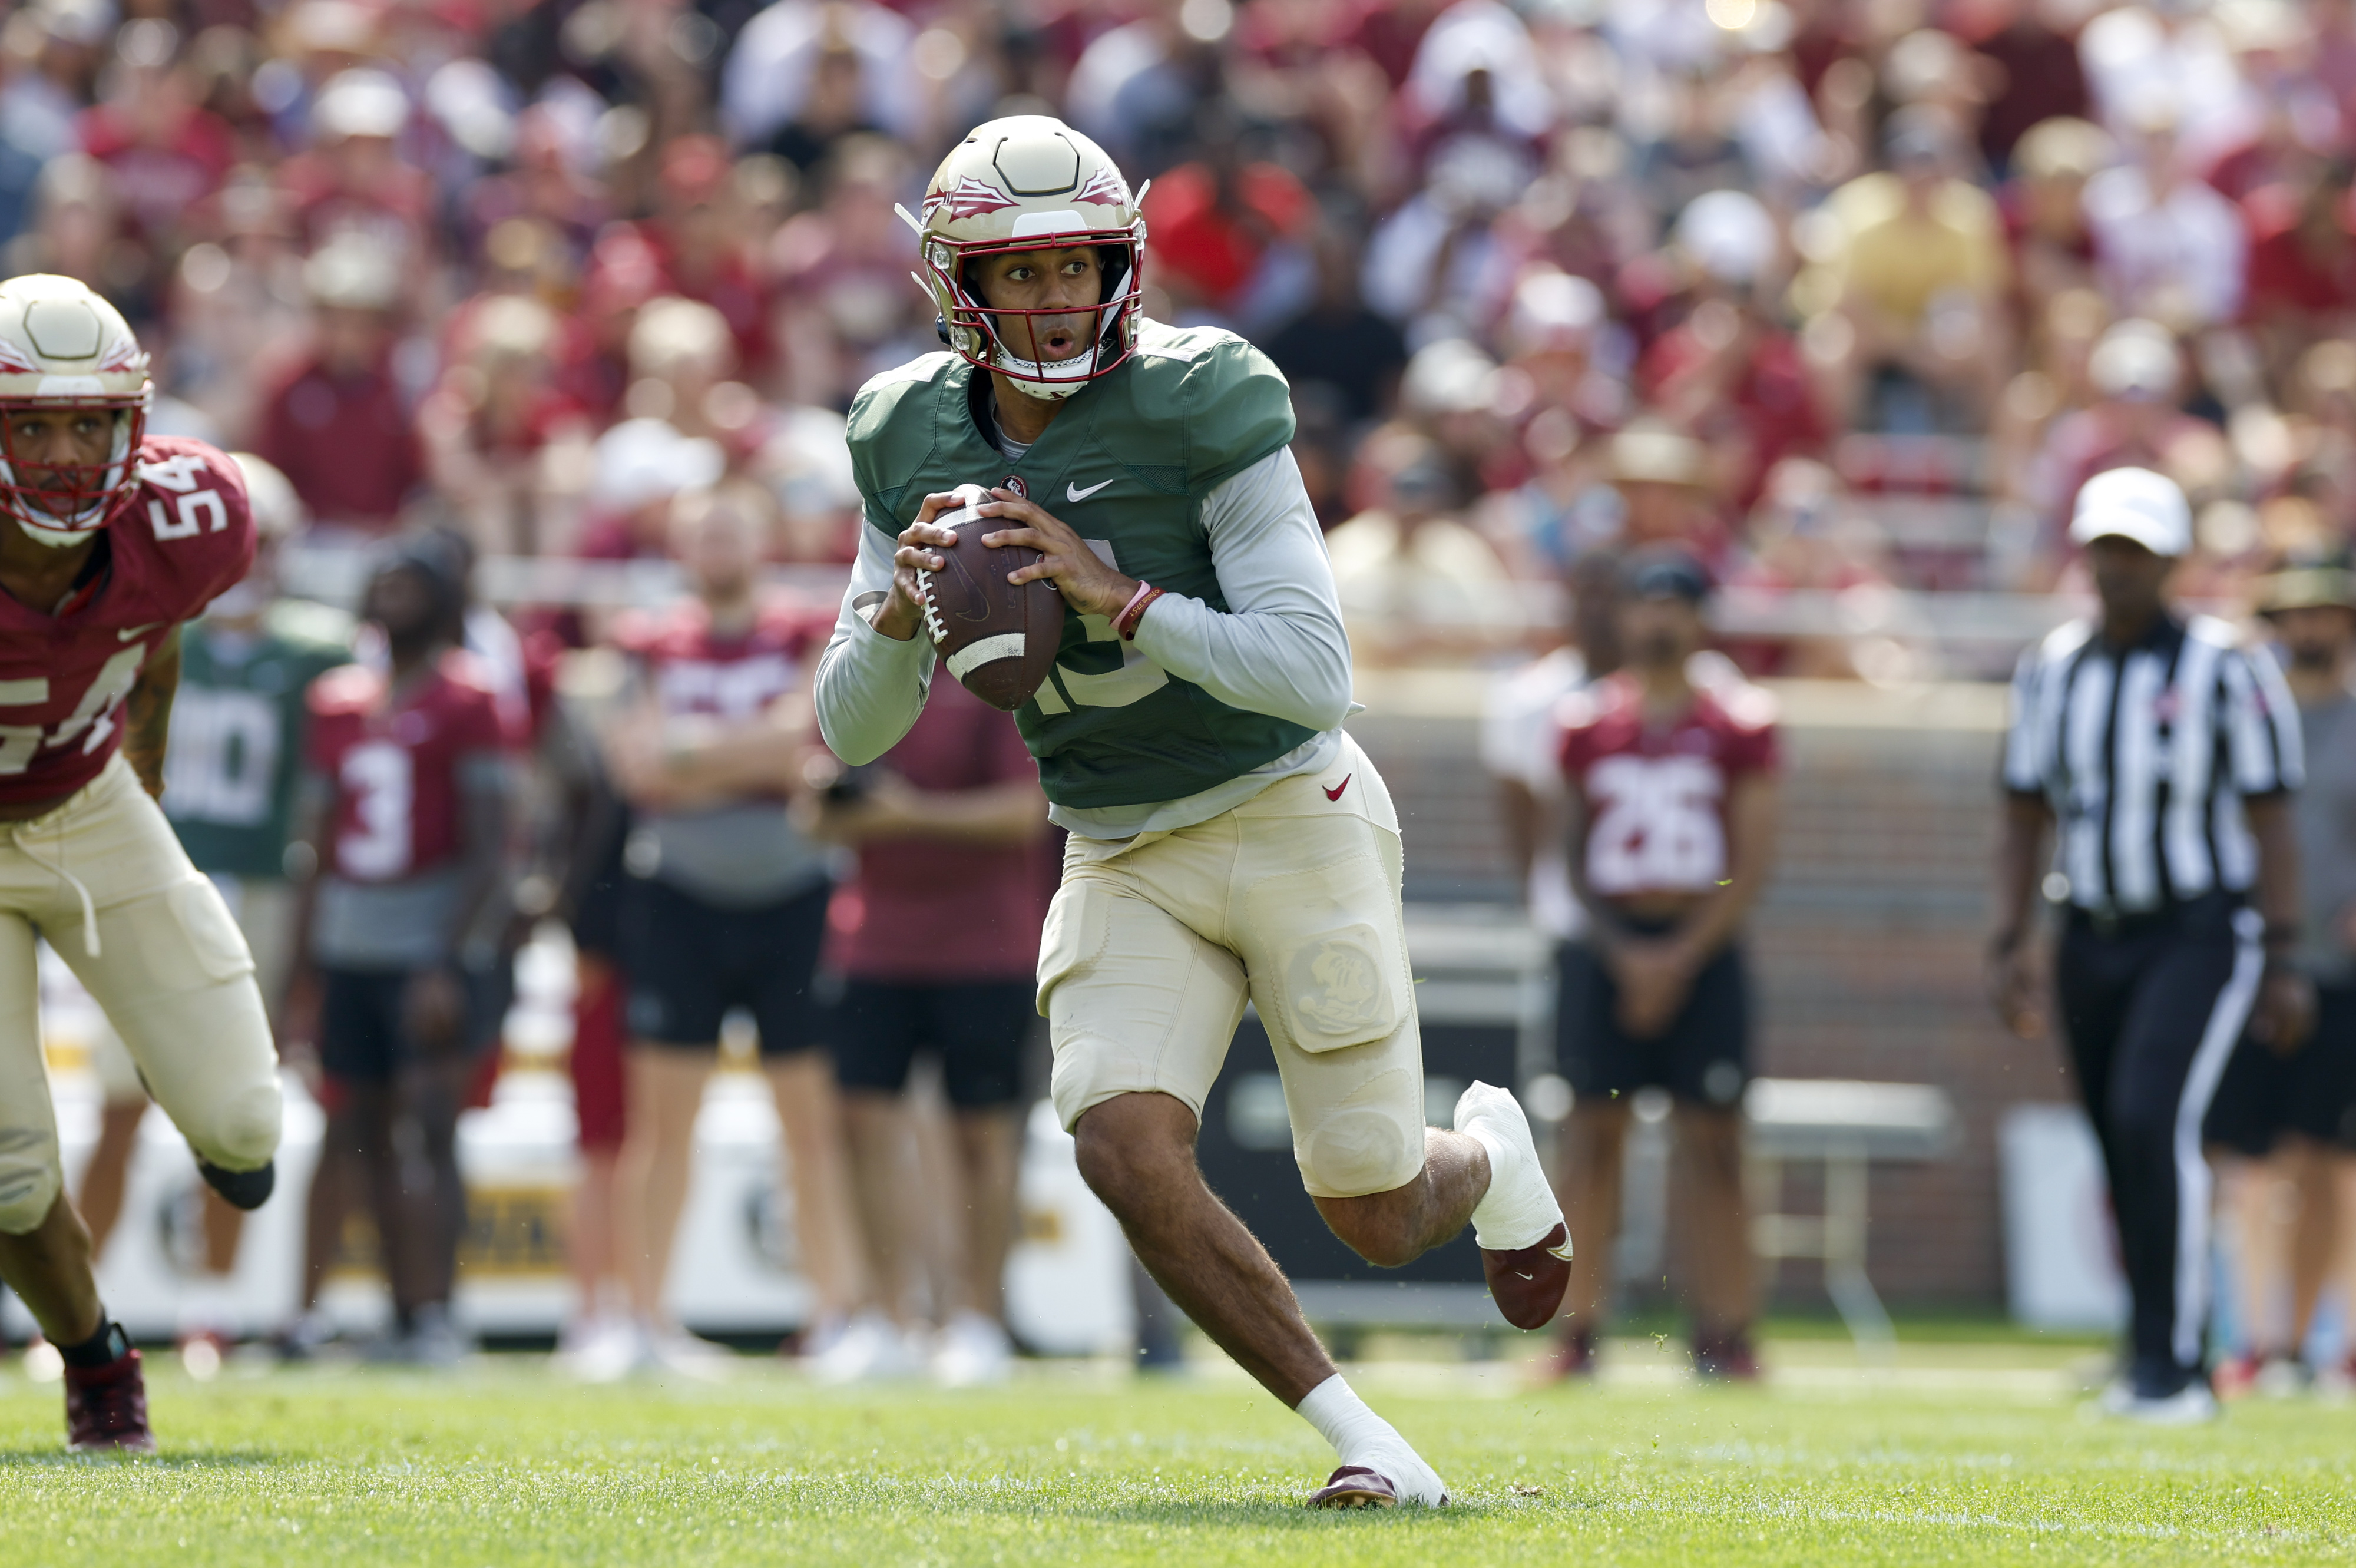 TALLAHASSEE, FL - APRIL 15: Florida State Seminoles quarterback Jordan Travis (13) runs with the ball during the Florida State Garnet & Gold Spring Showcase on April 15, 2023 at Bobby Bowden Field at Doak Campbell Stadium in Tallahassee, Fl. 